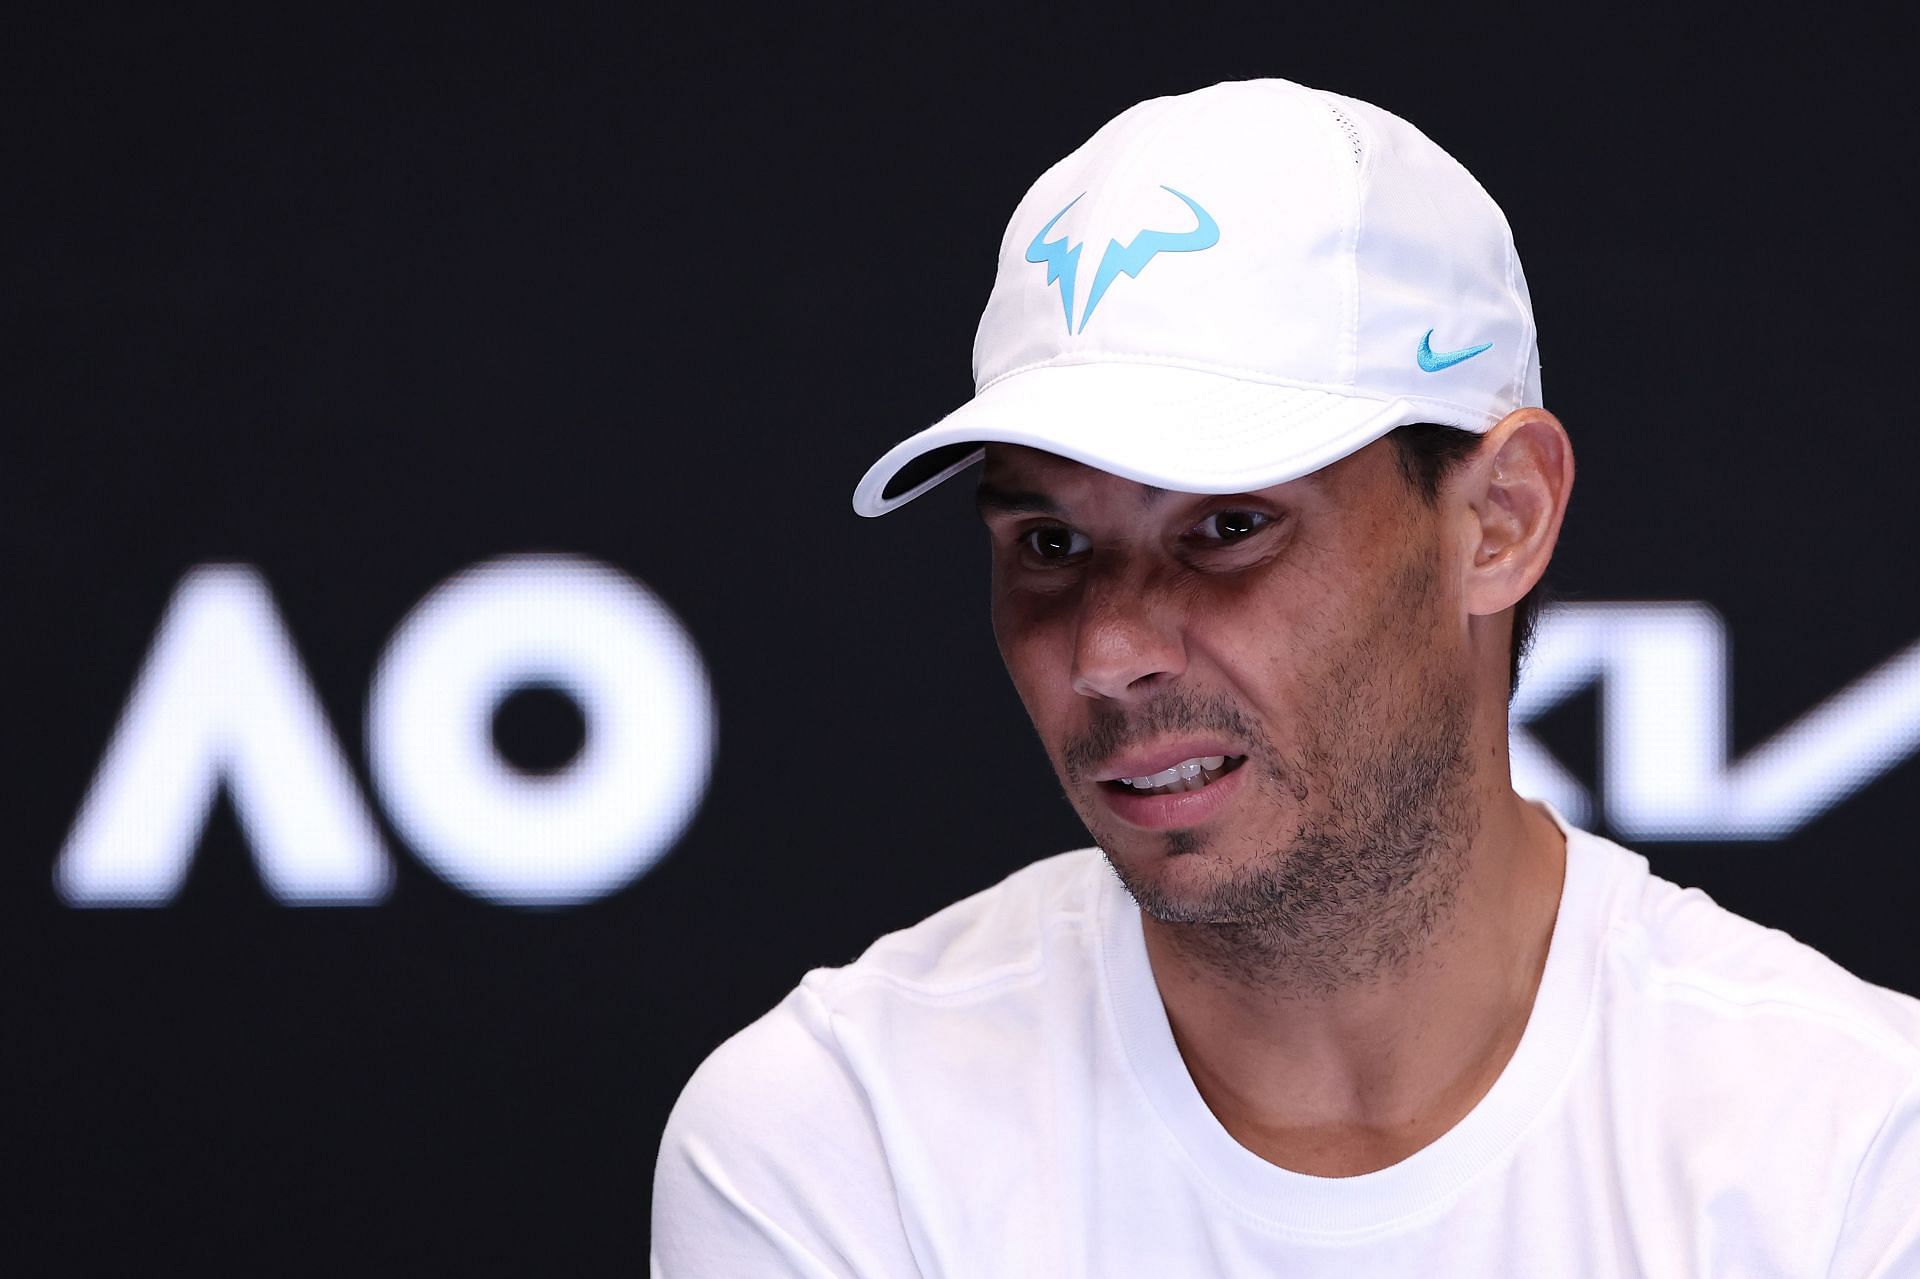 Rafael Nadal pictured during a press conference at the 2023 Australian Open - Day 3.